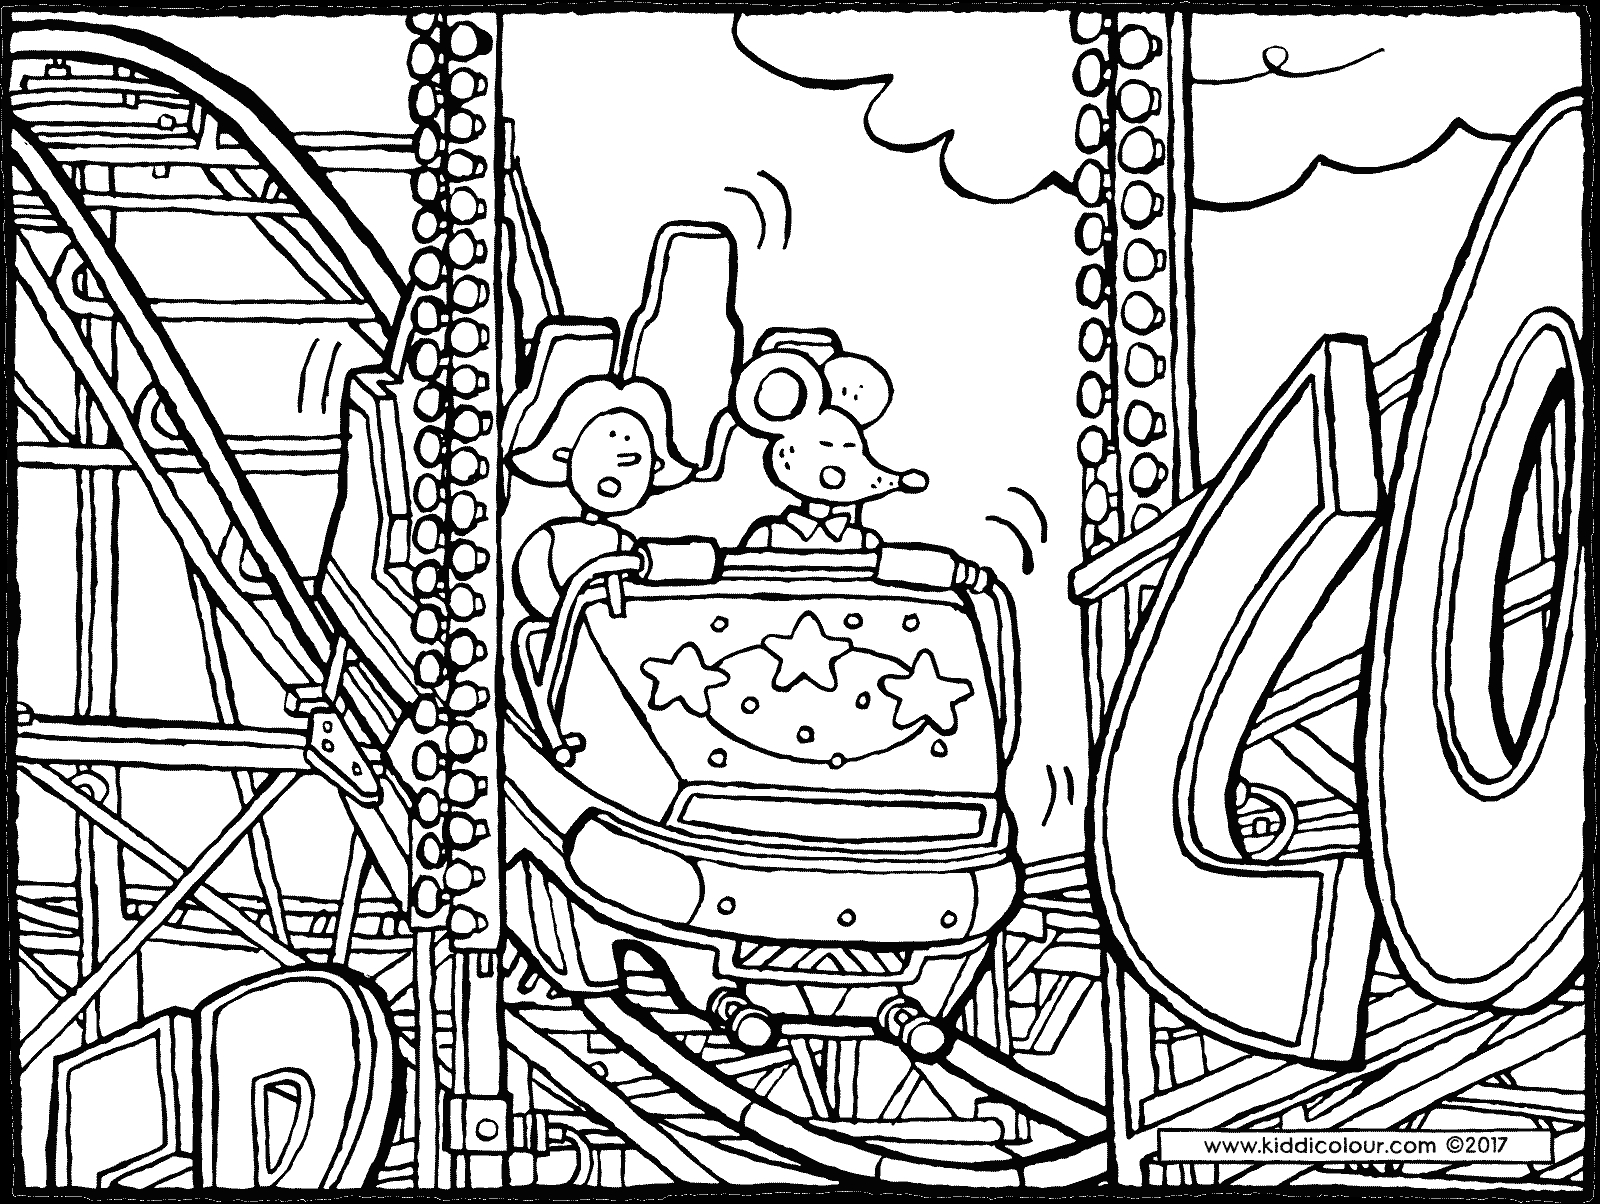 Roller Coaster Coloring Pages at Free printable